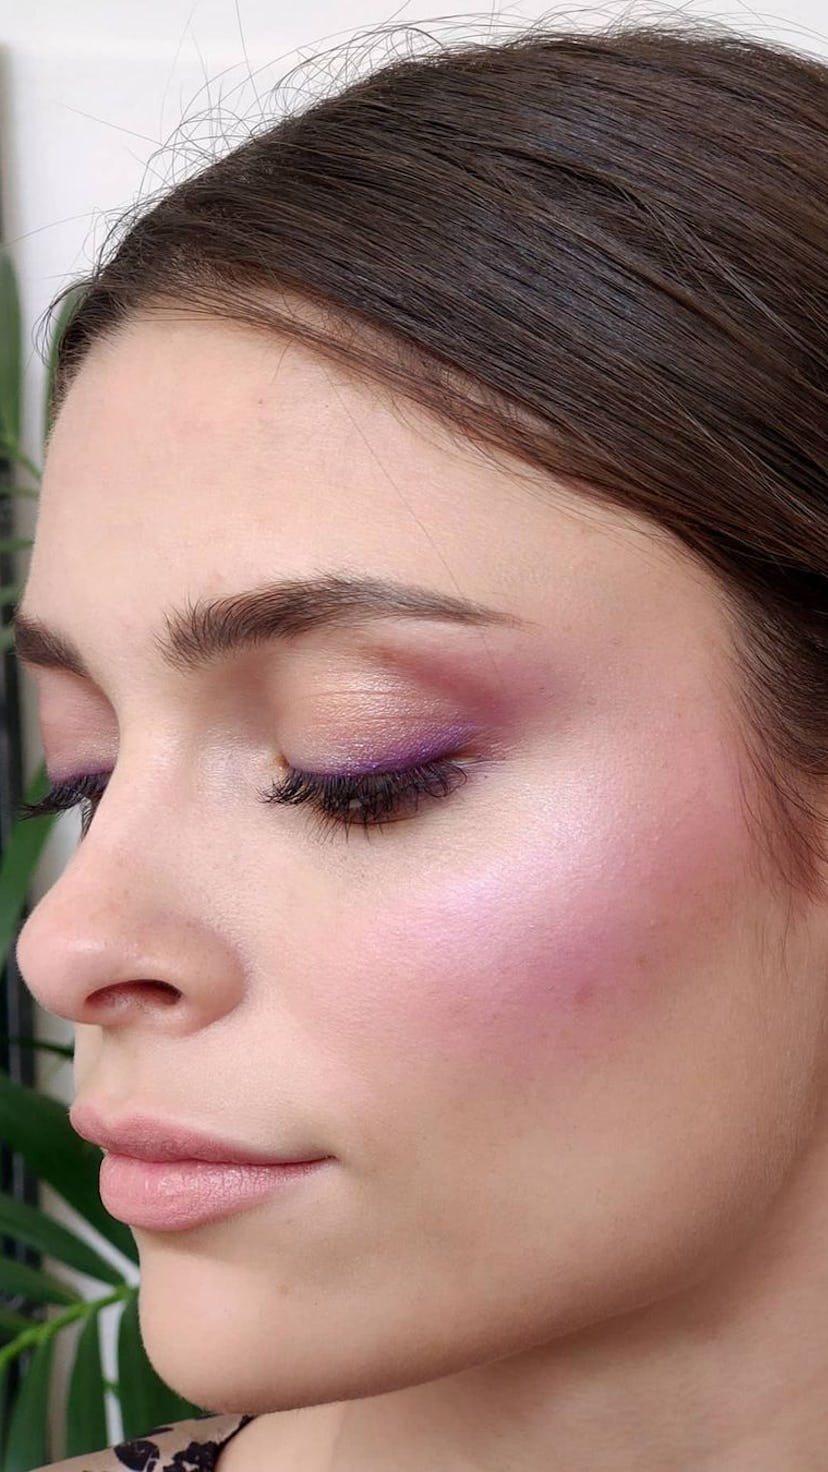 A woman with her eyes shut posing with purple blush applied to her cheeks